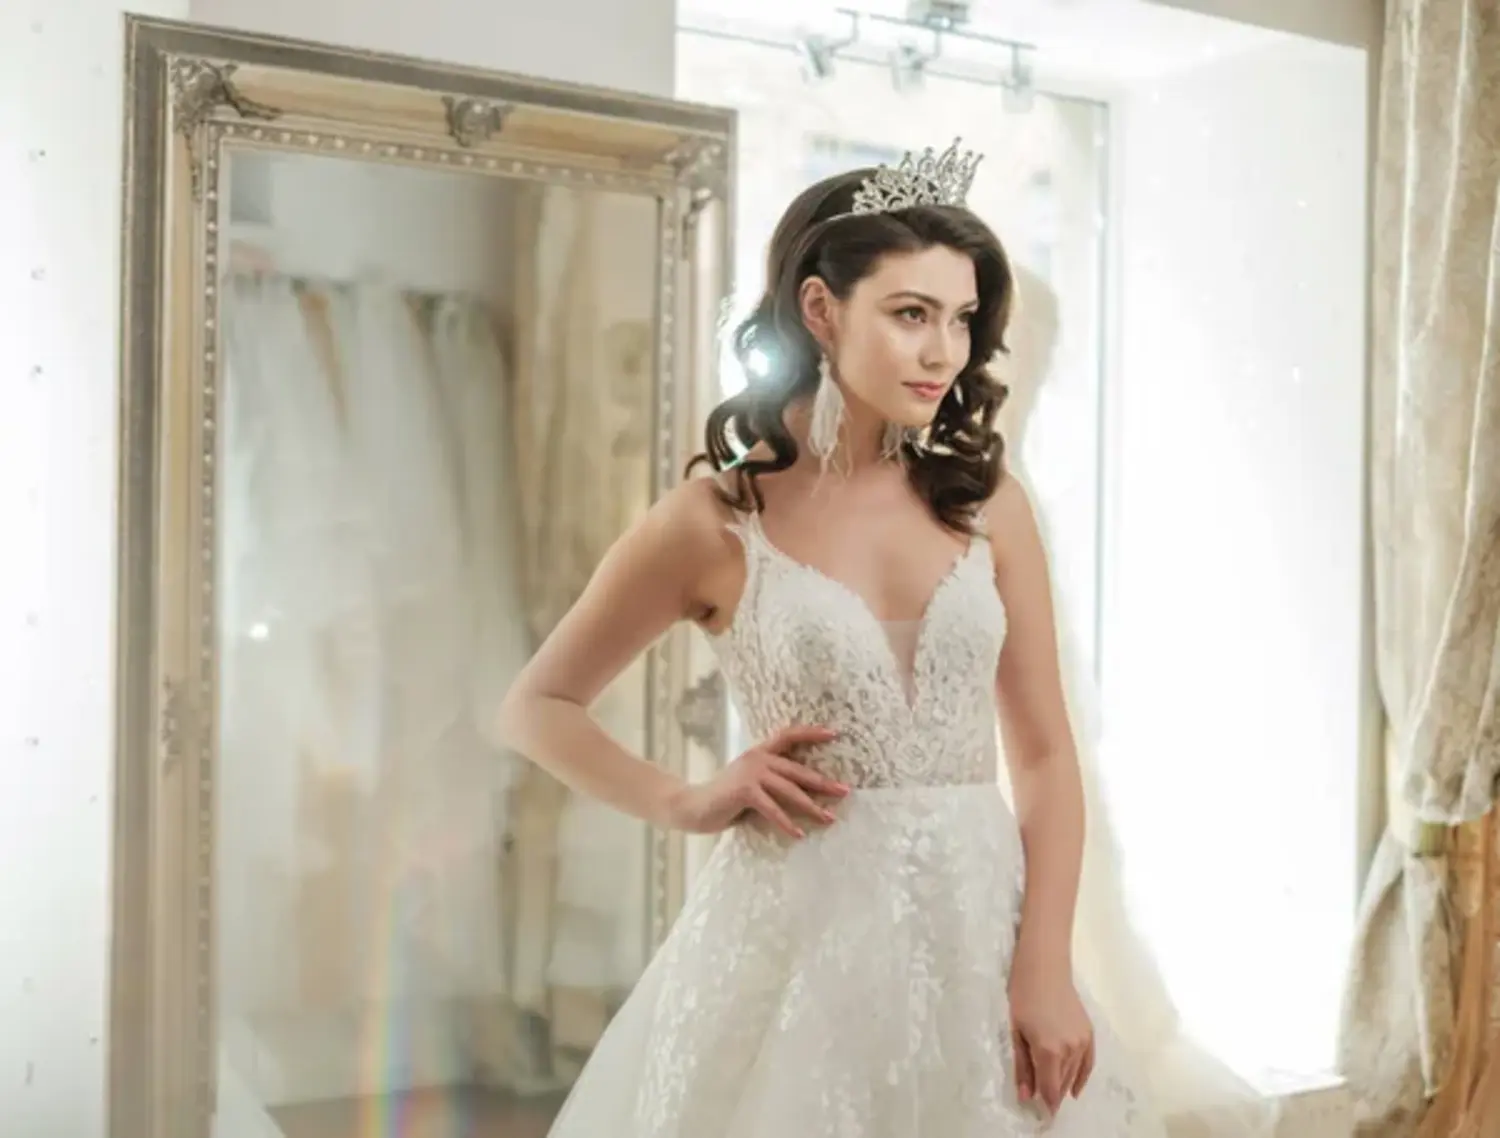 Why Do Brides Spend So Much On A Wedding Dress?